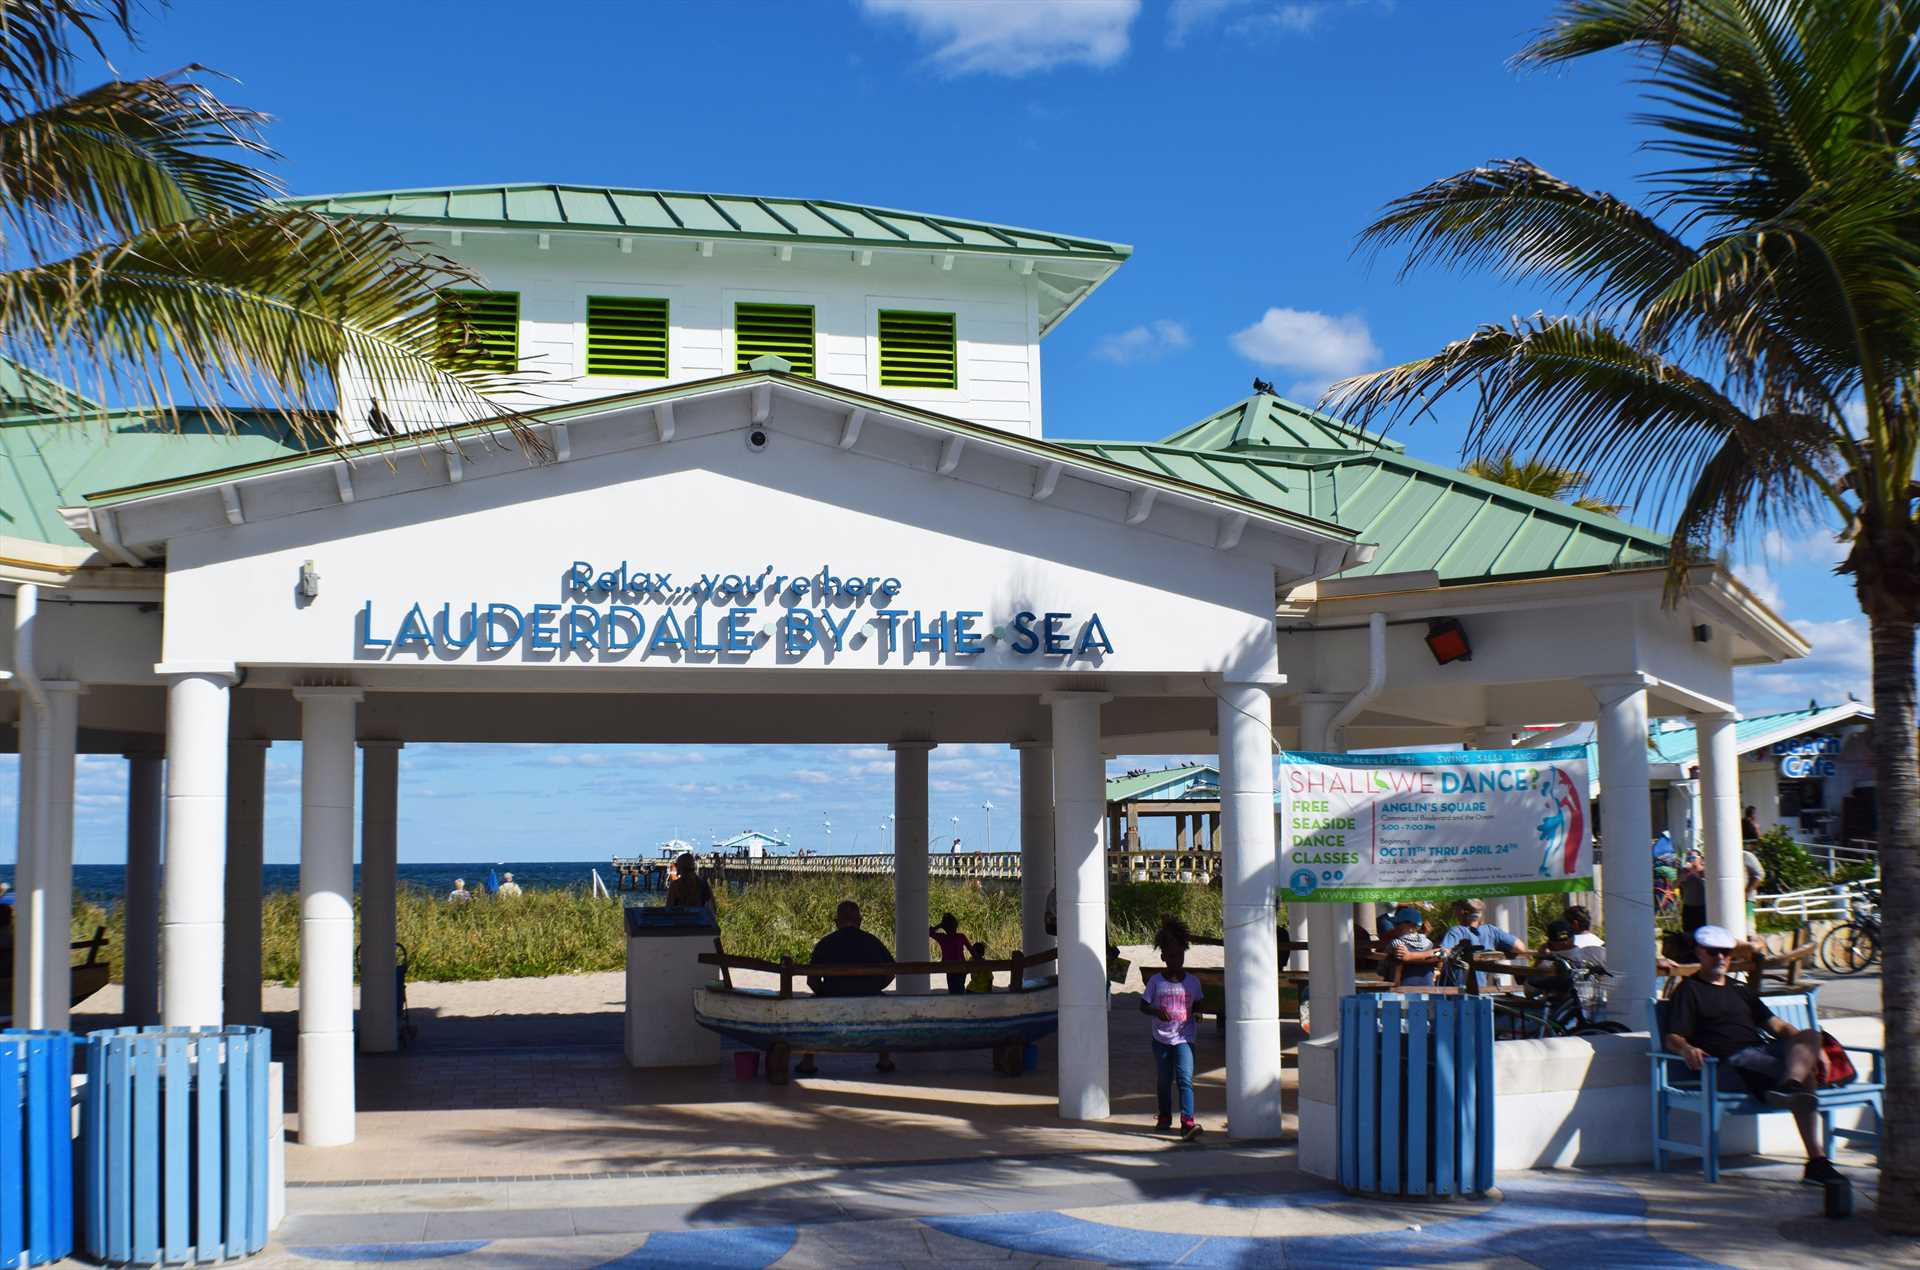 Lauderdale by the Sea beach is 2 miles to the south.